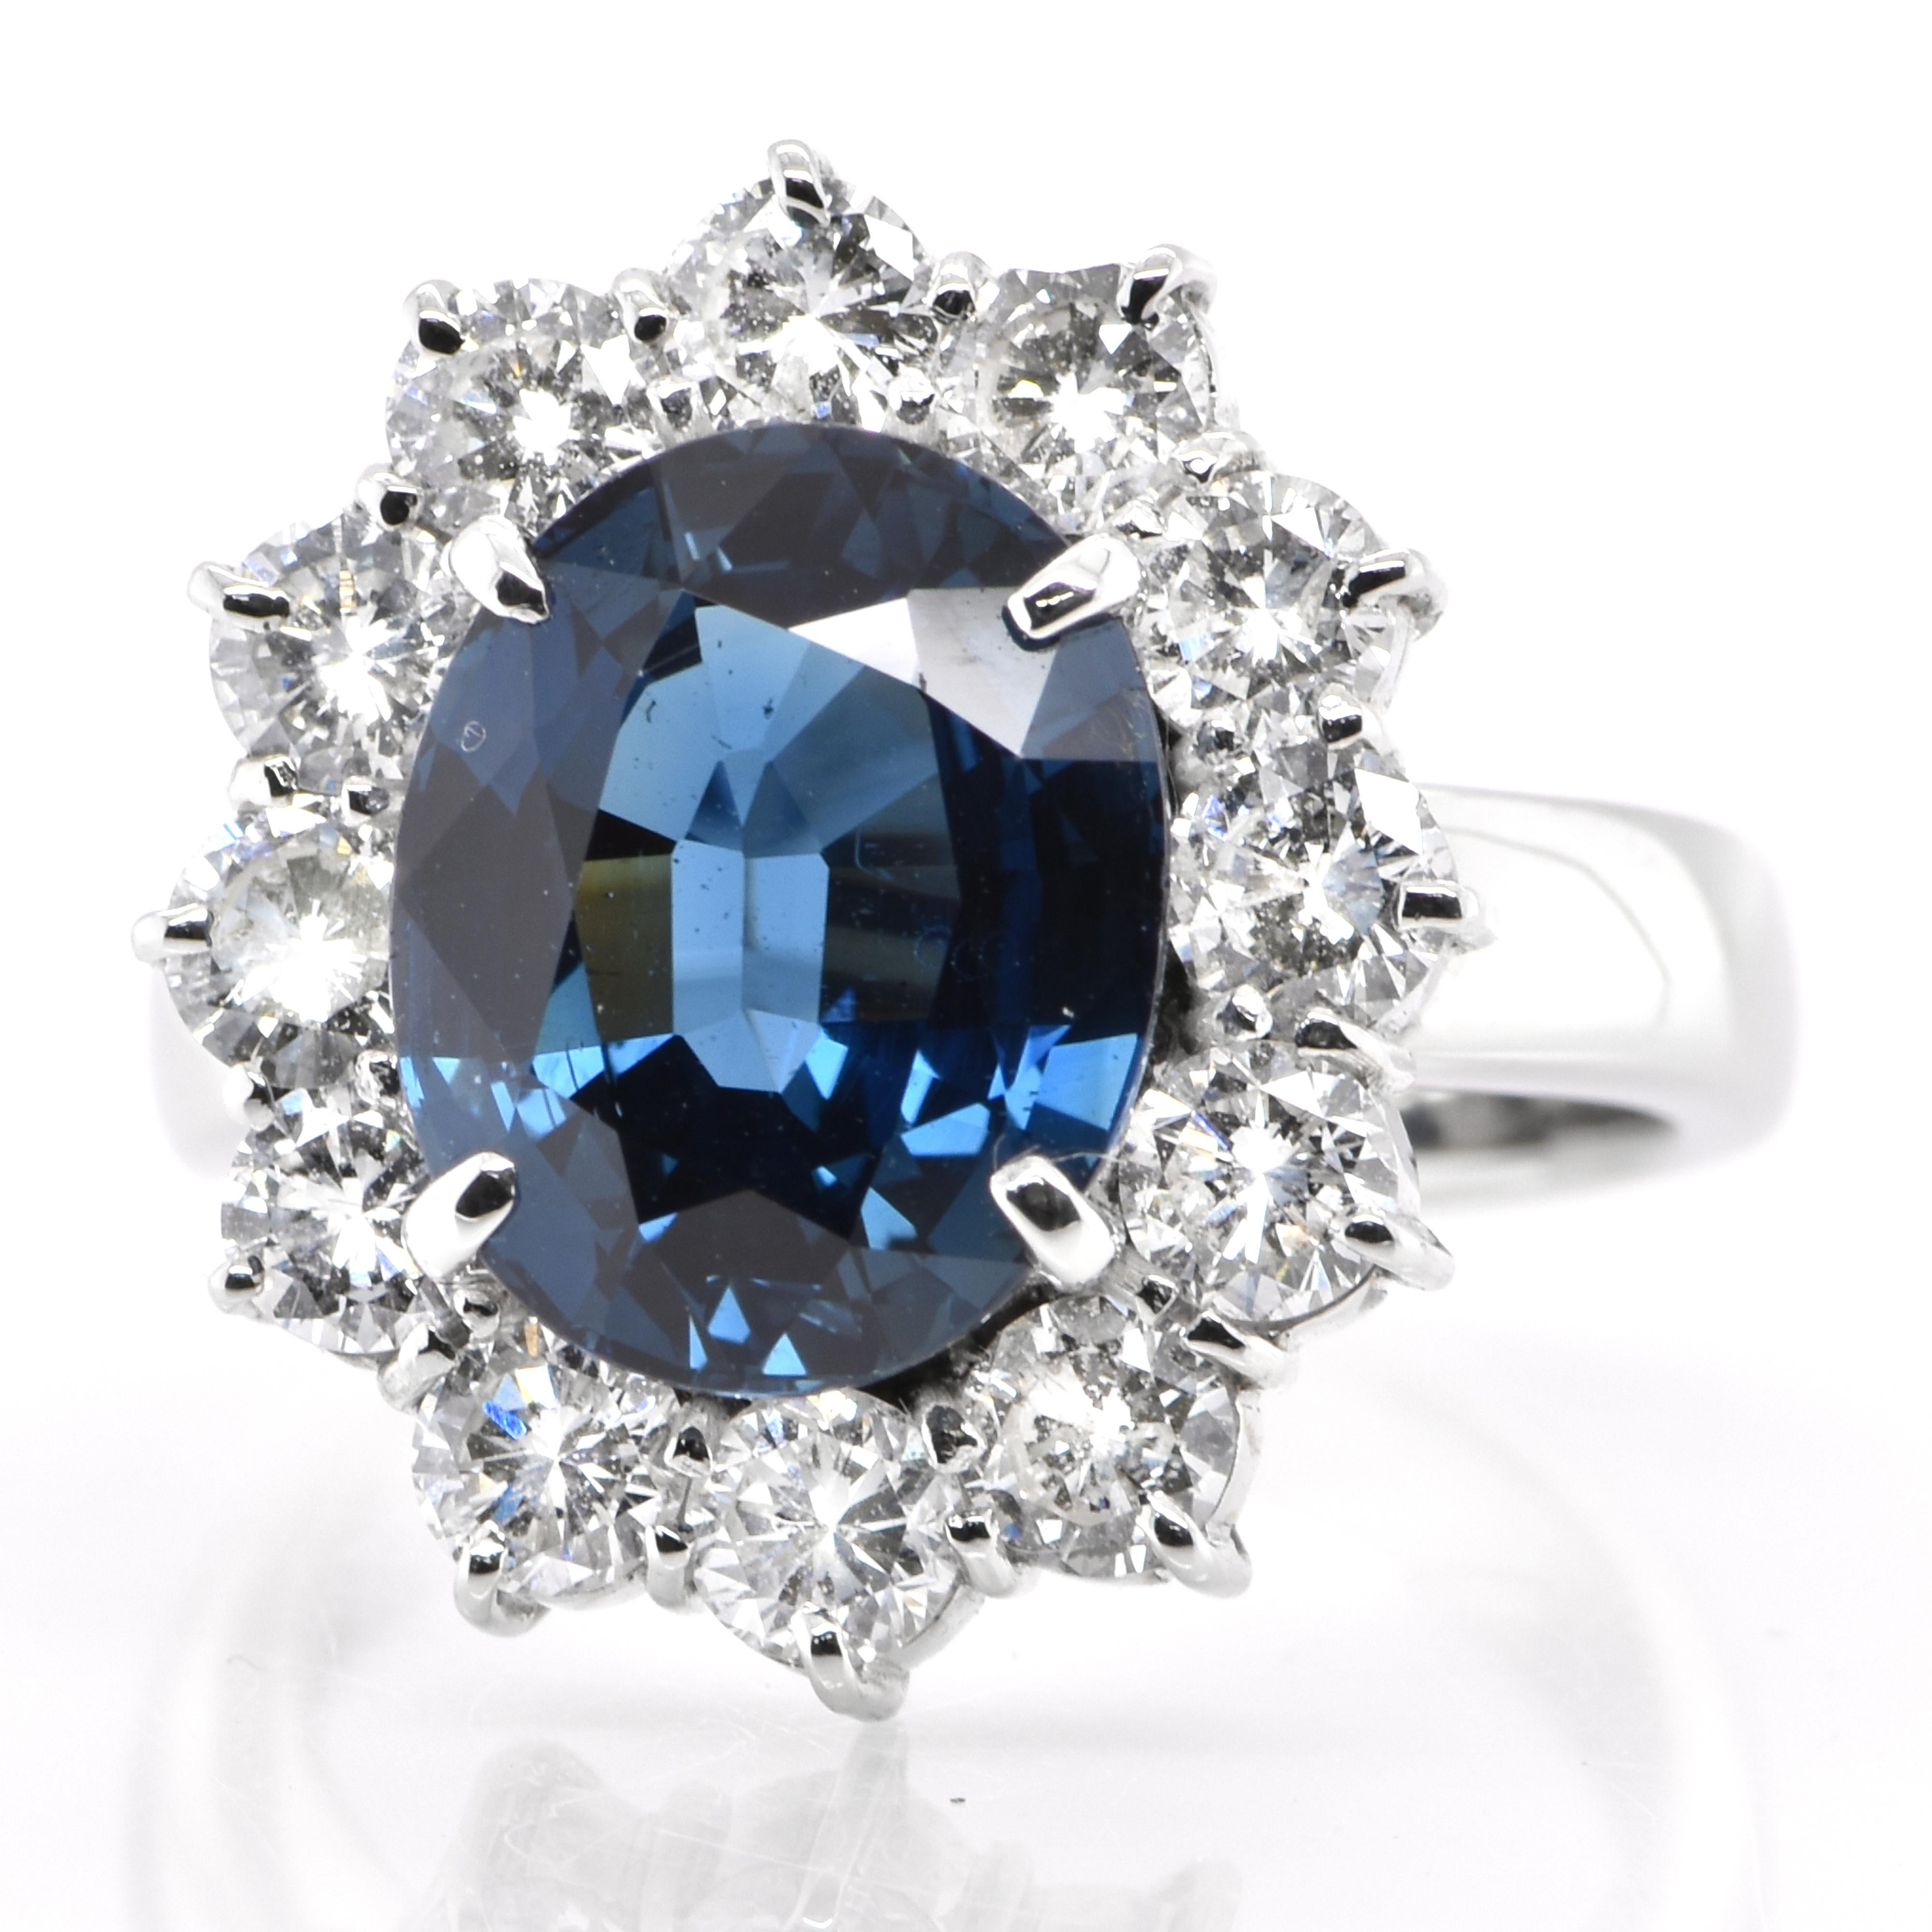 A beautiful ring featuring 5.96 Carat, Natural Sapphire and 1.80 Carats Diamond Accents set in Platinum. Sapphires have extraordinary durability - they excel in hardness as well as toughness and durability making them very popular in jewelry.